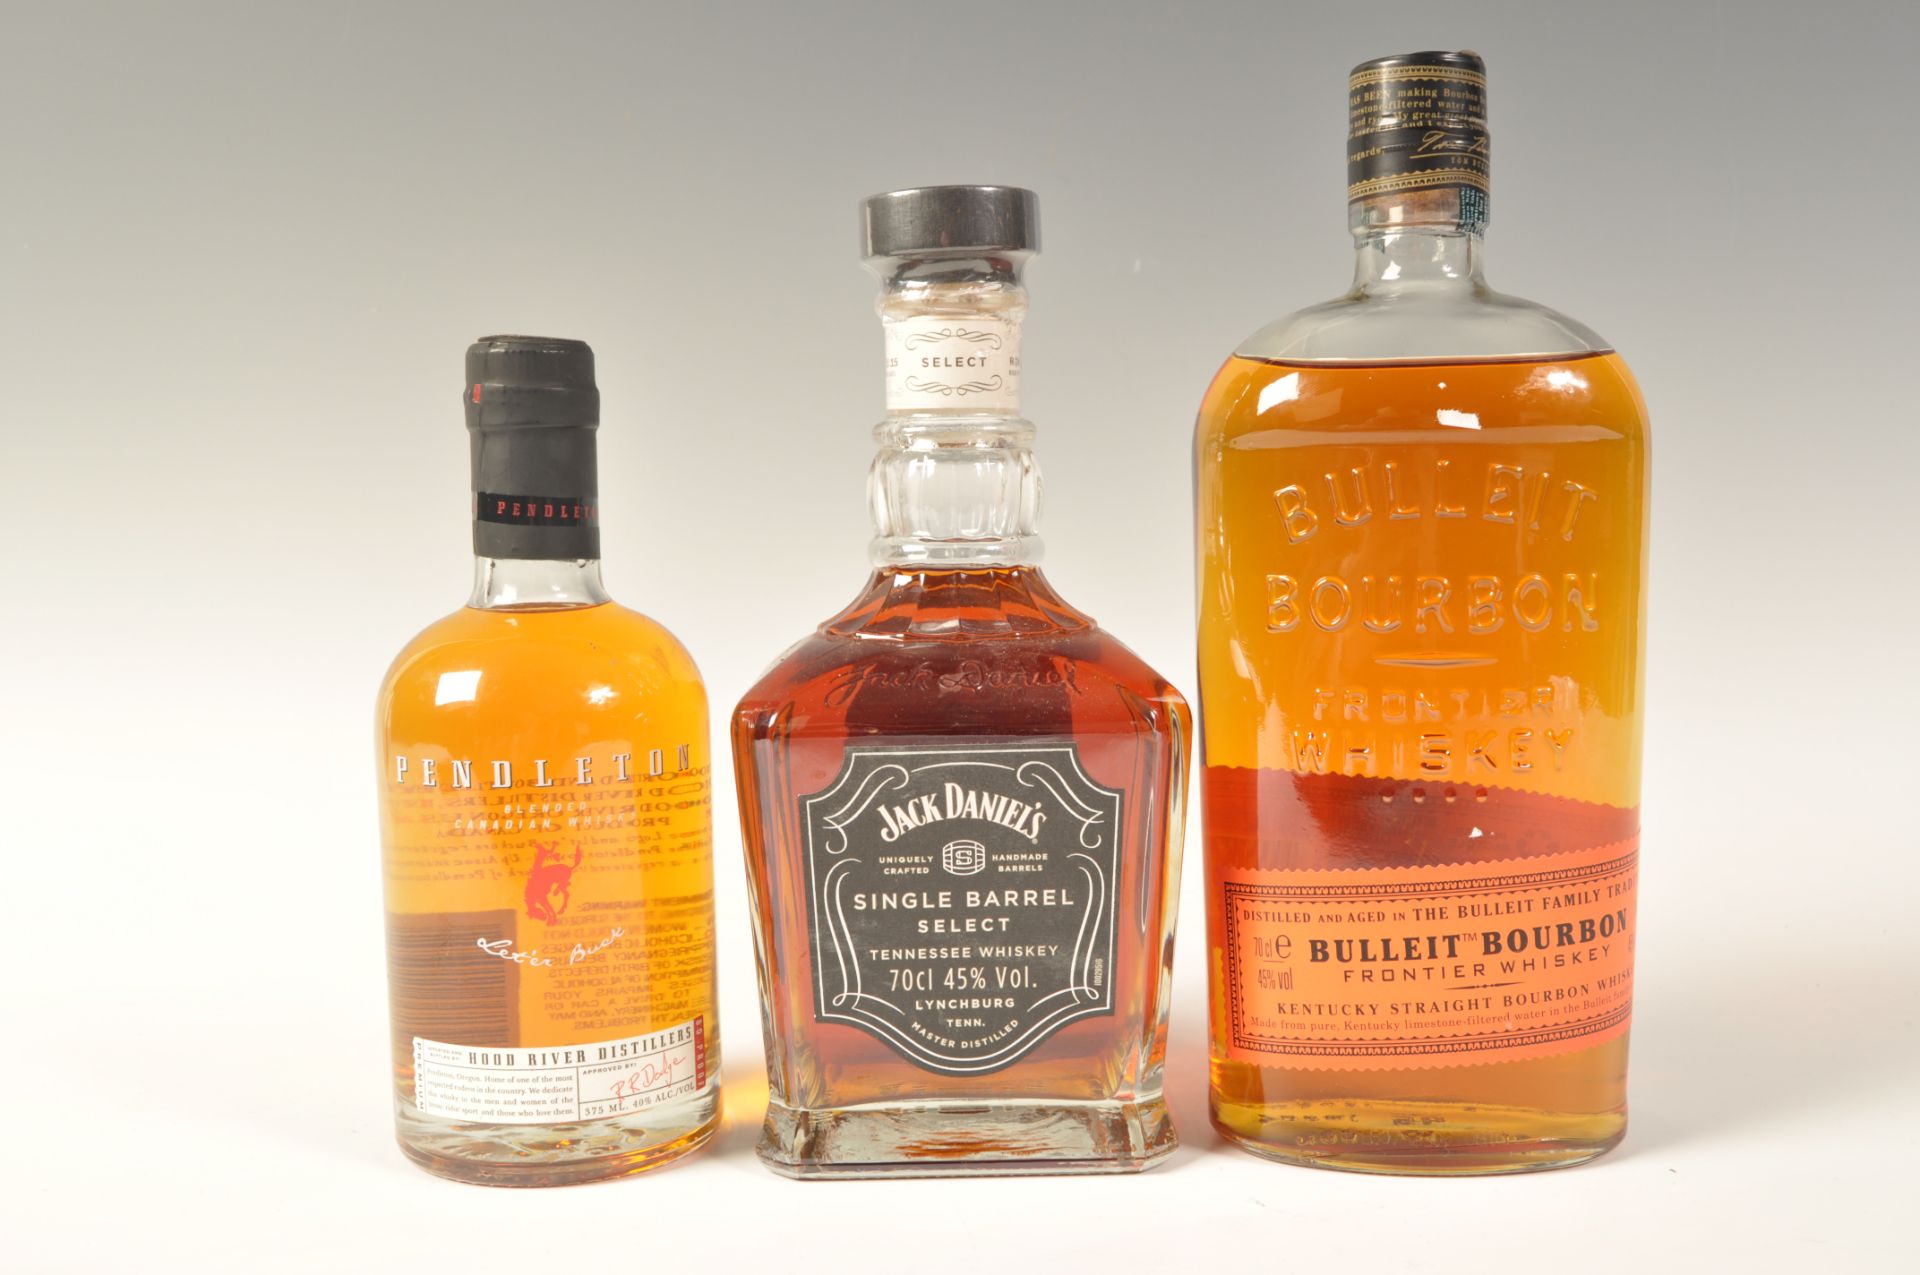 THREE BOTTLES OF AMERICAN / CANADIAN WHISKY